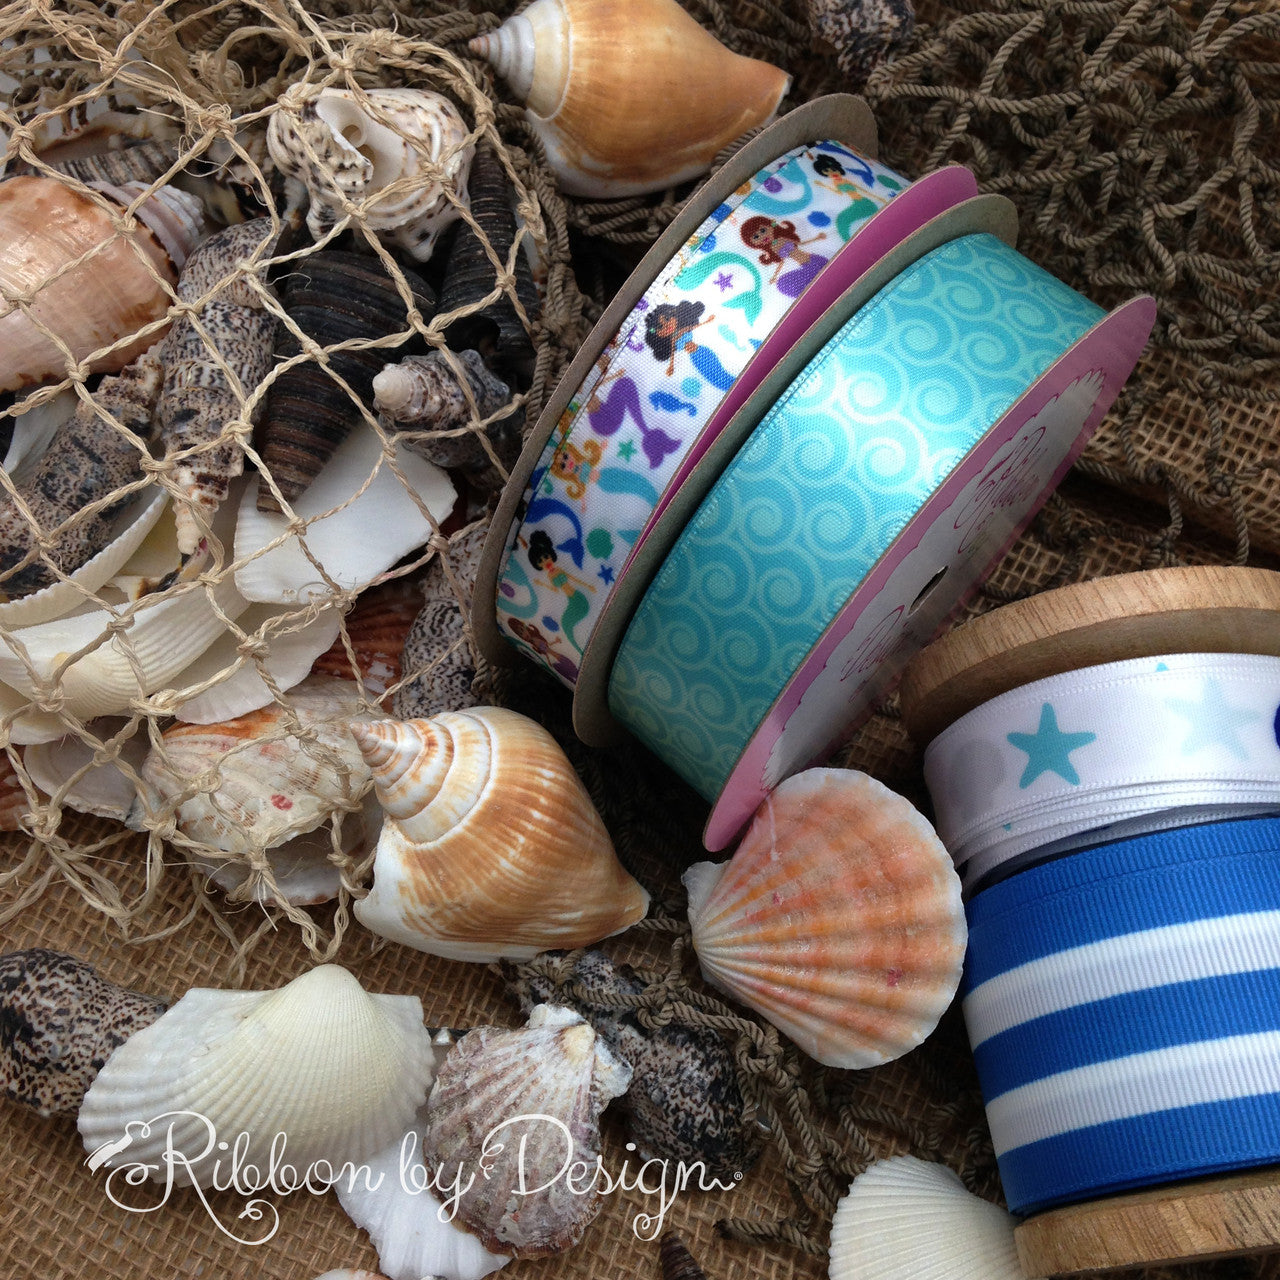 Our mermaids mix and match with many of the ribbons in our Nautical Collection to create an interesting vignette!